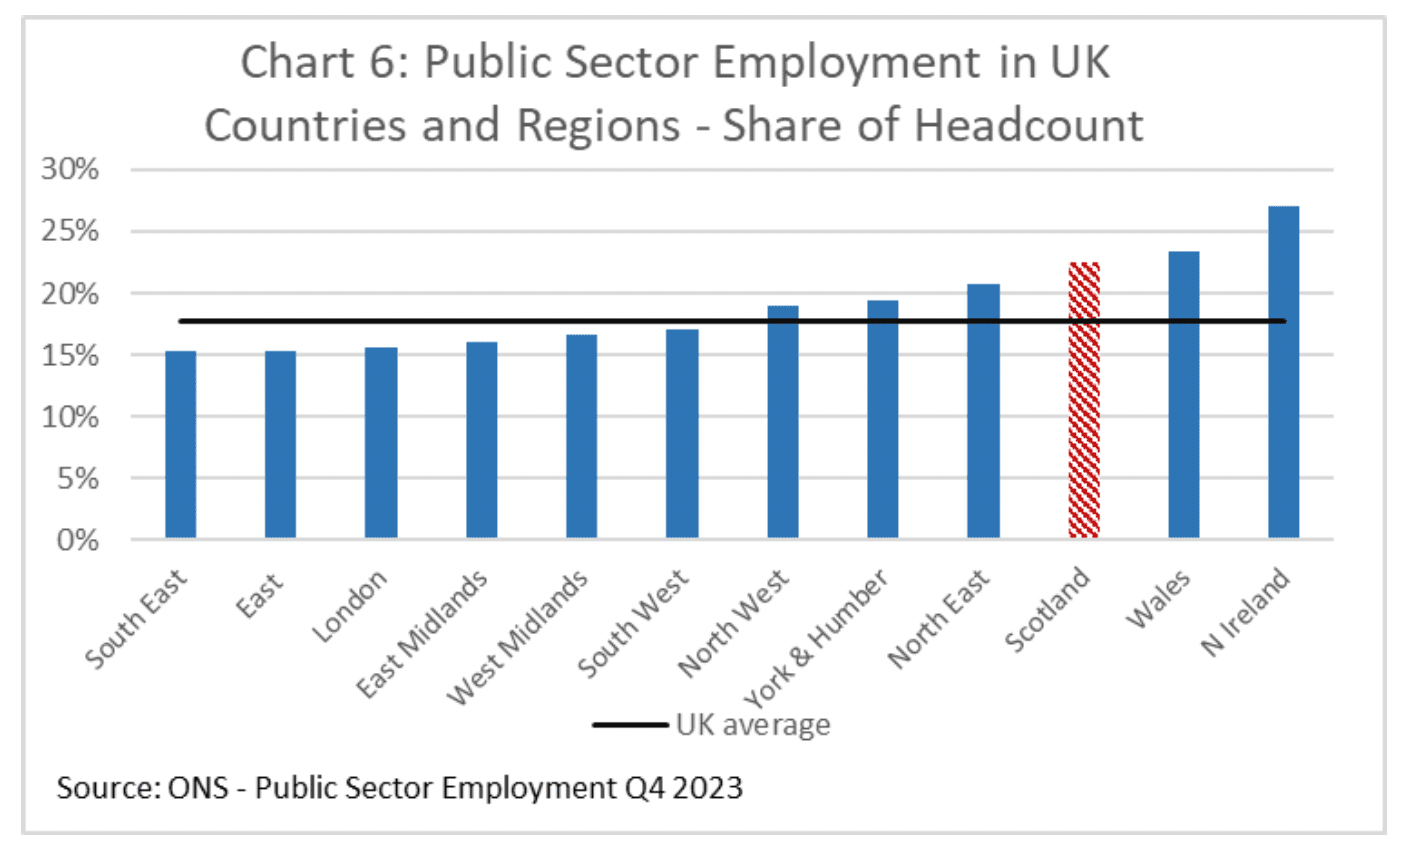 A chart showing public sector employment as a share of total employment across the UK countries and regions. Scotland has the third highest share, behind Wales and Northern Ireland.